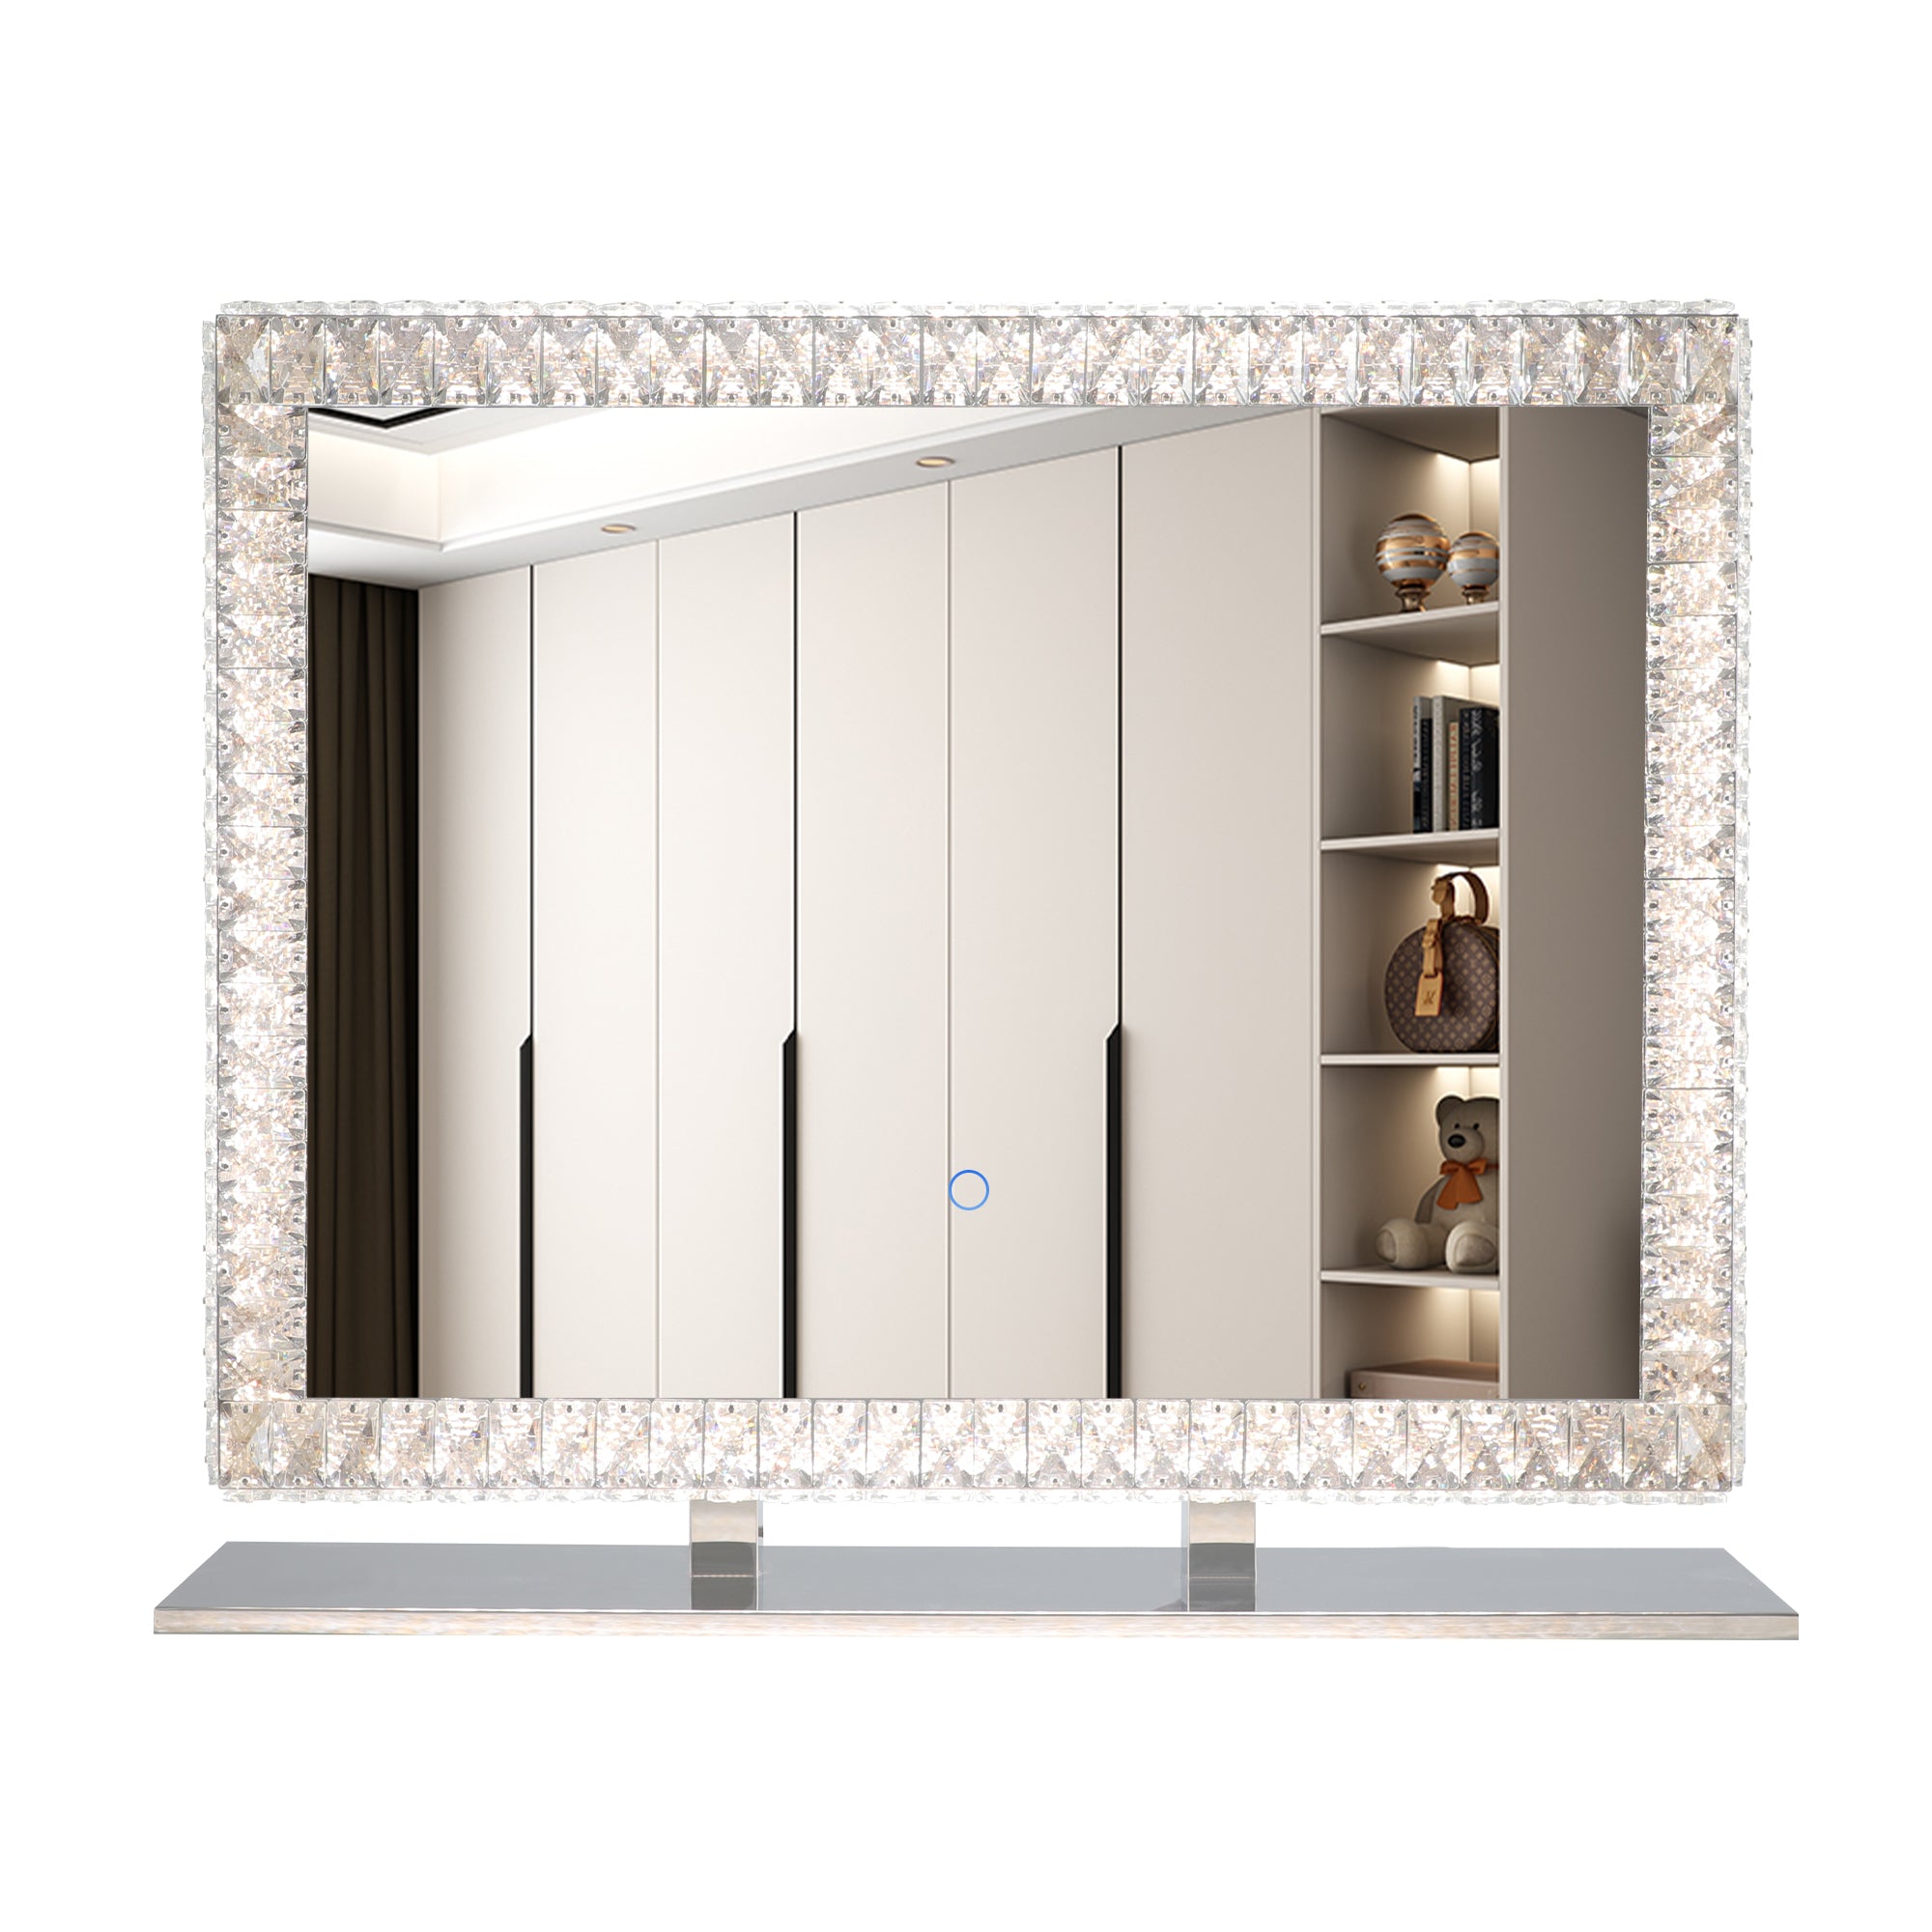 Eden35.43" x 27.56" Luxurious LED Mirror with Crystal Frame and Touch Control Dimmable Lights